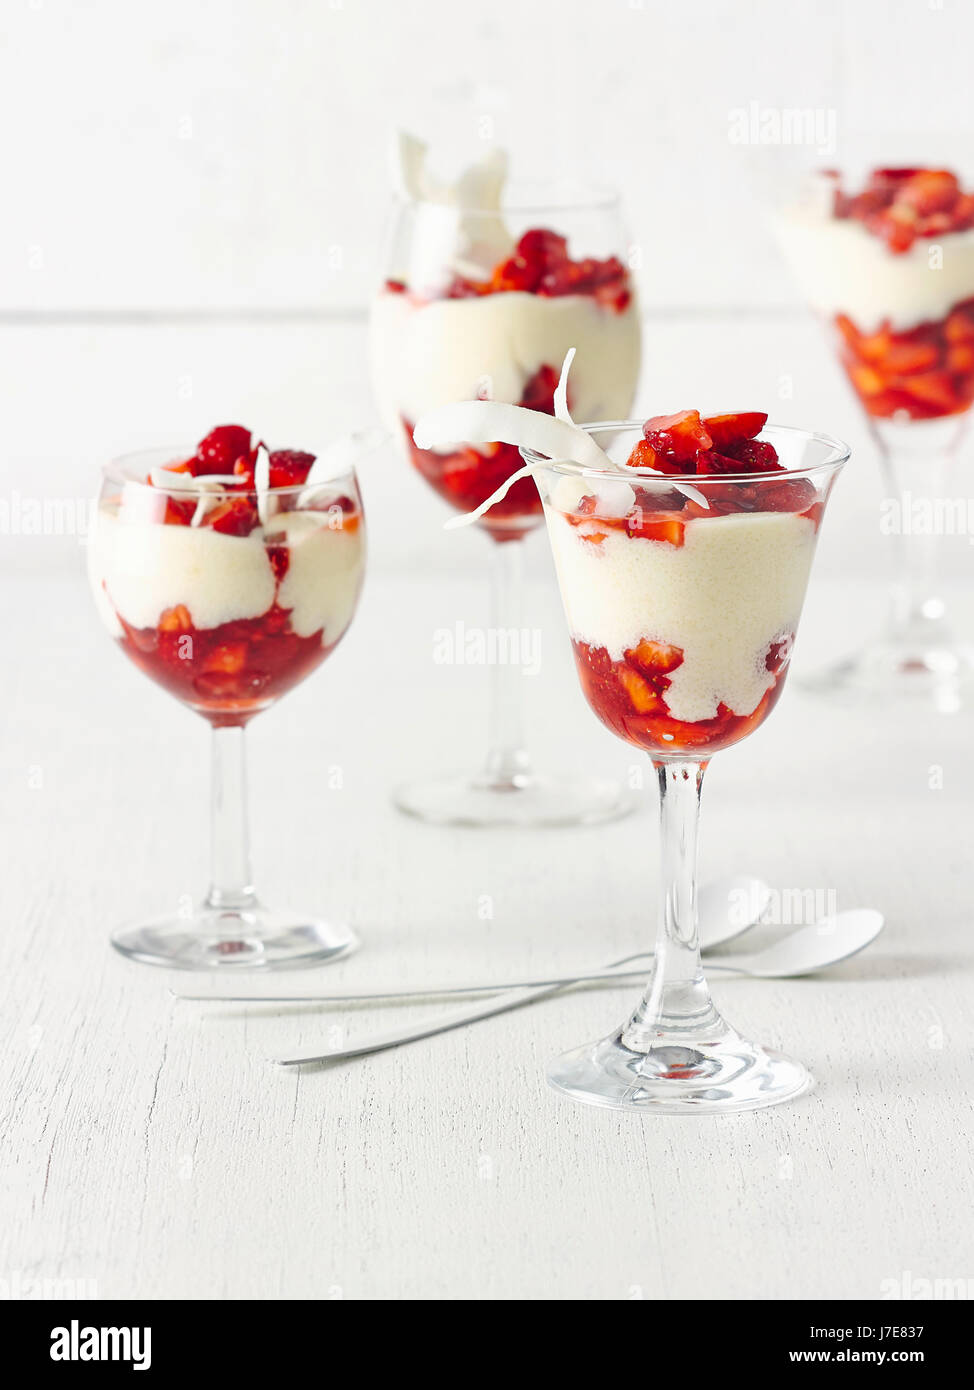 Semolina creme with coconut and strawberries Stock Photo